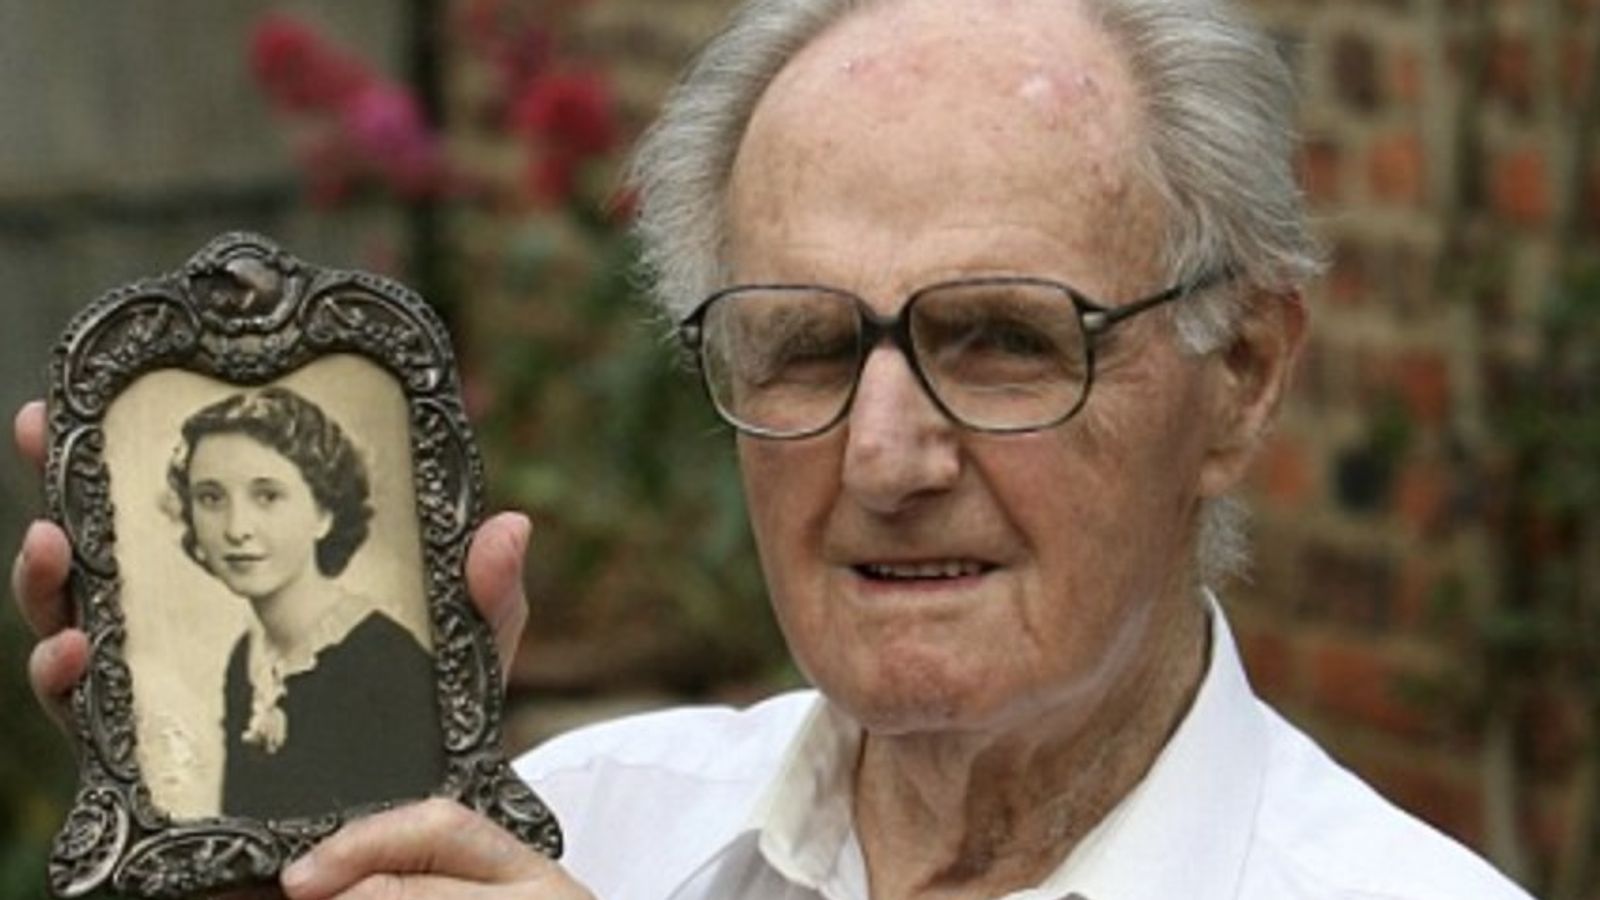 D-Day: 'An act of love saved my grandpop' - how a framed photo of veteran's wife saved his life